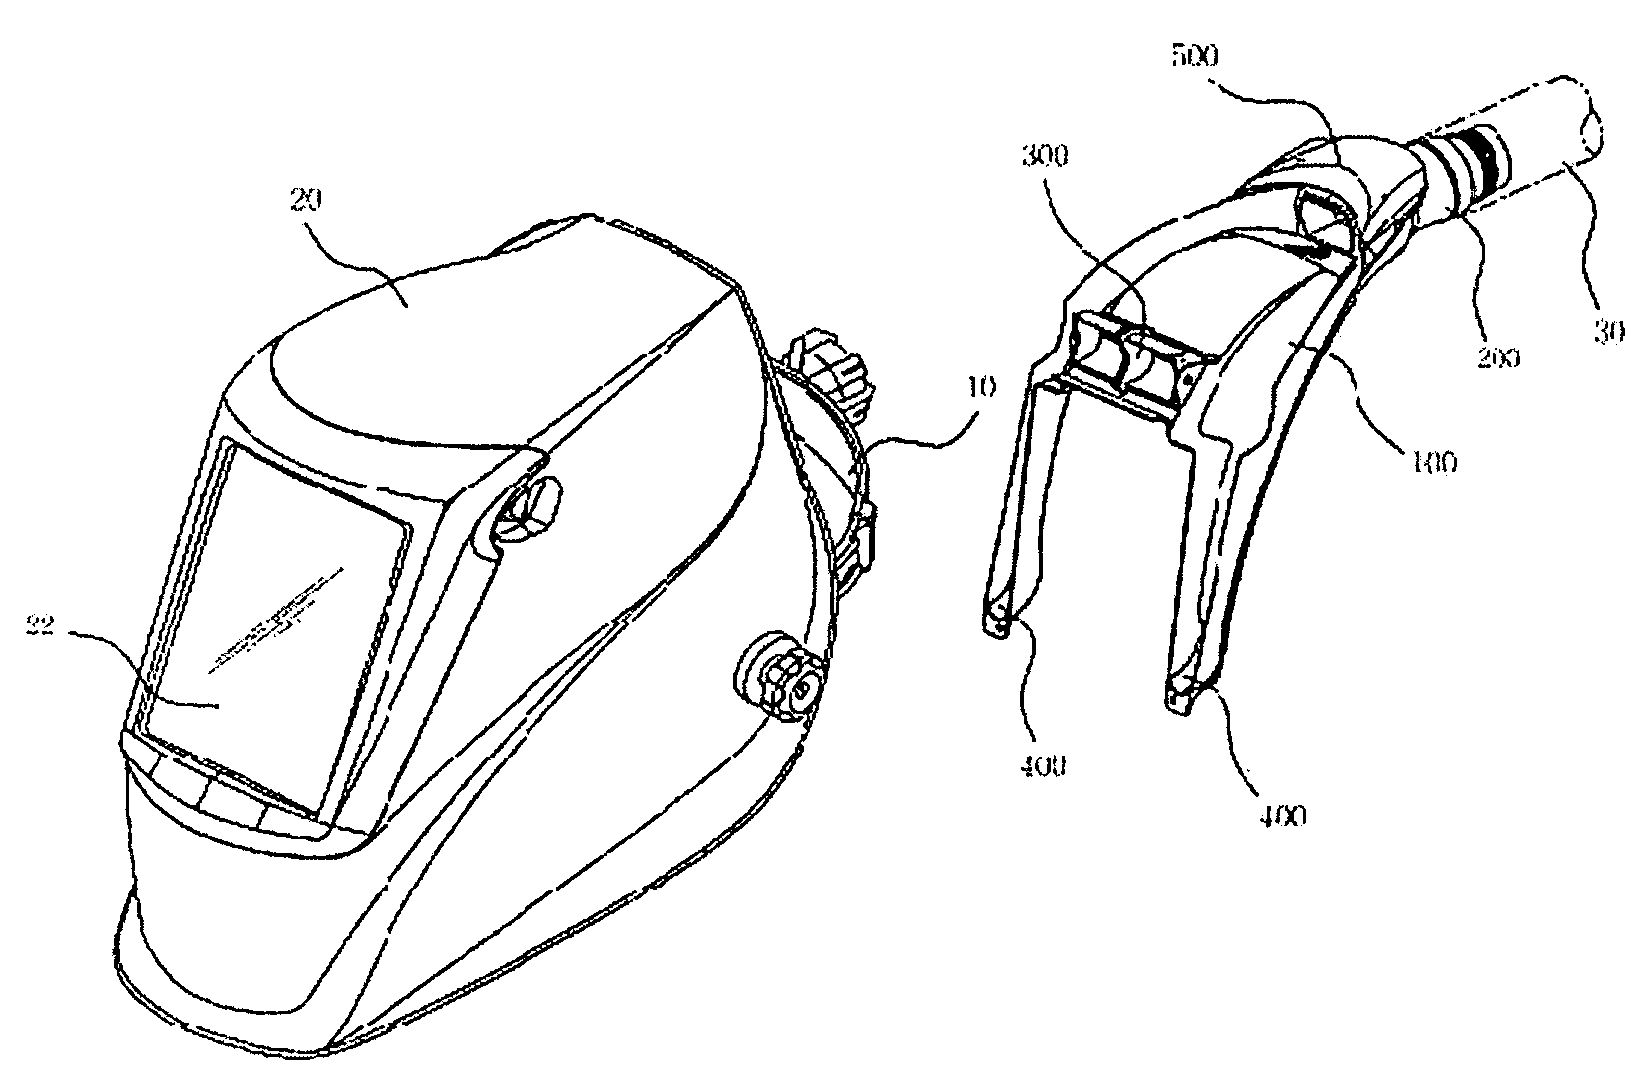 Air supplying device for welding mask